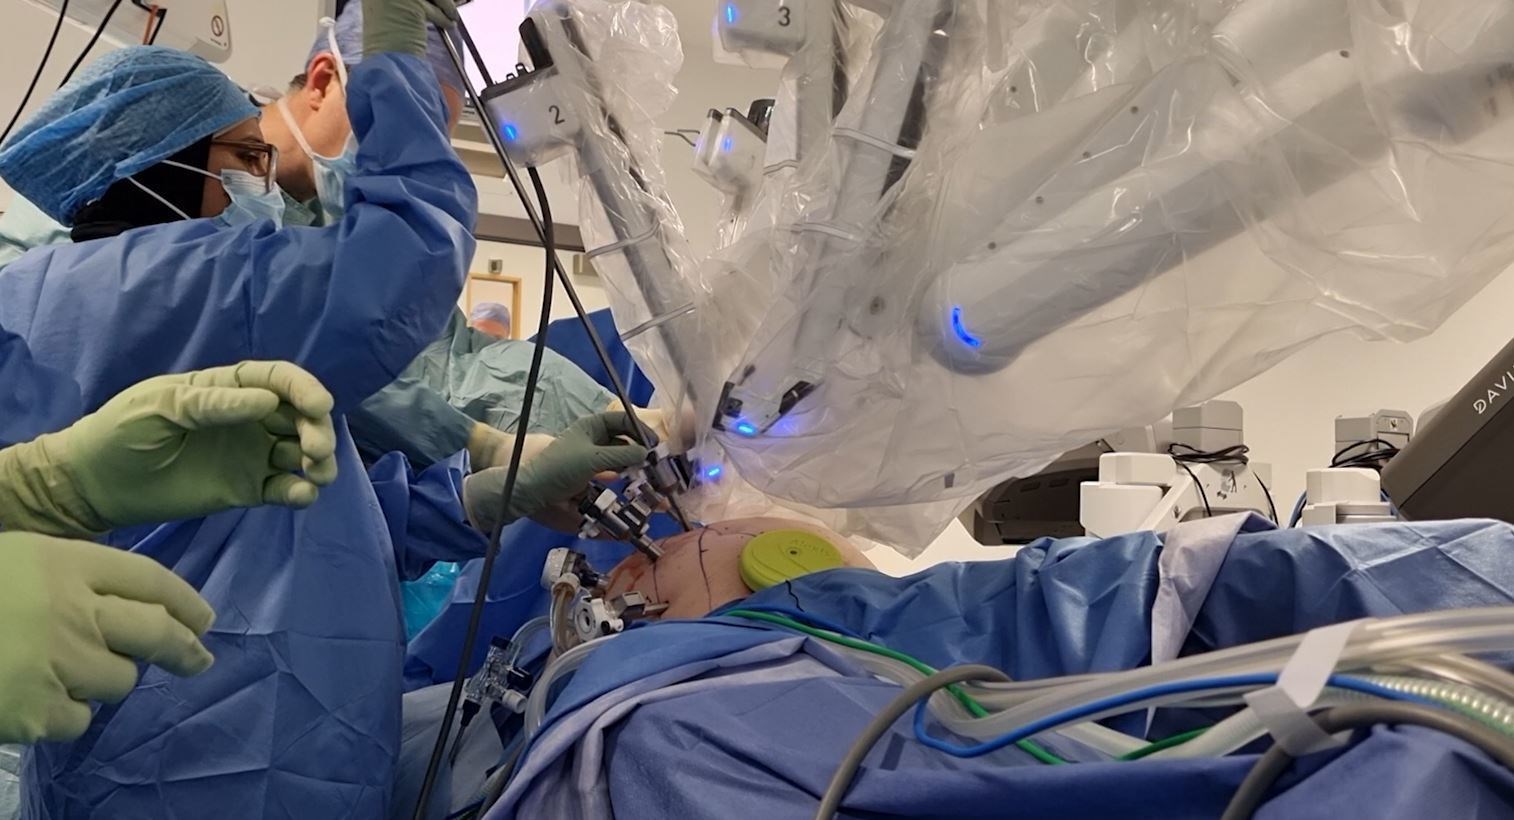 The new robotic surgery equipment allows for precision surgical work to be undertaken.